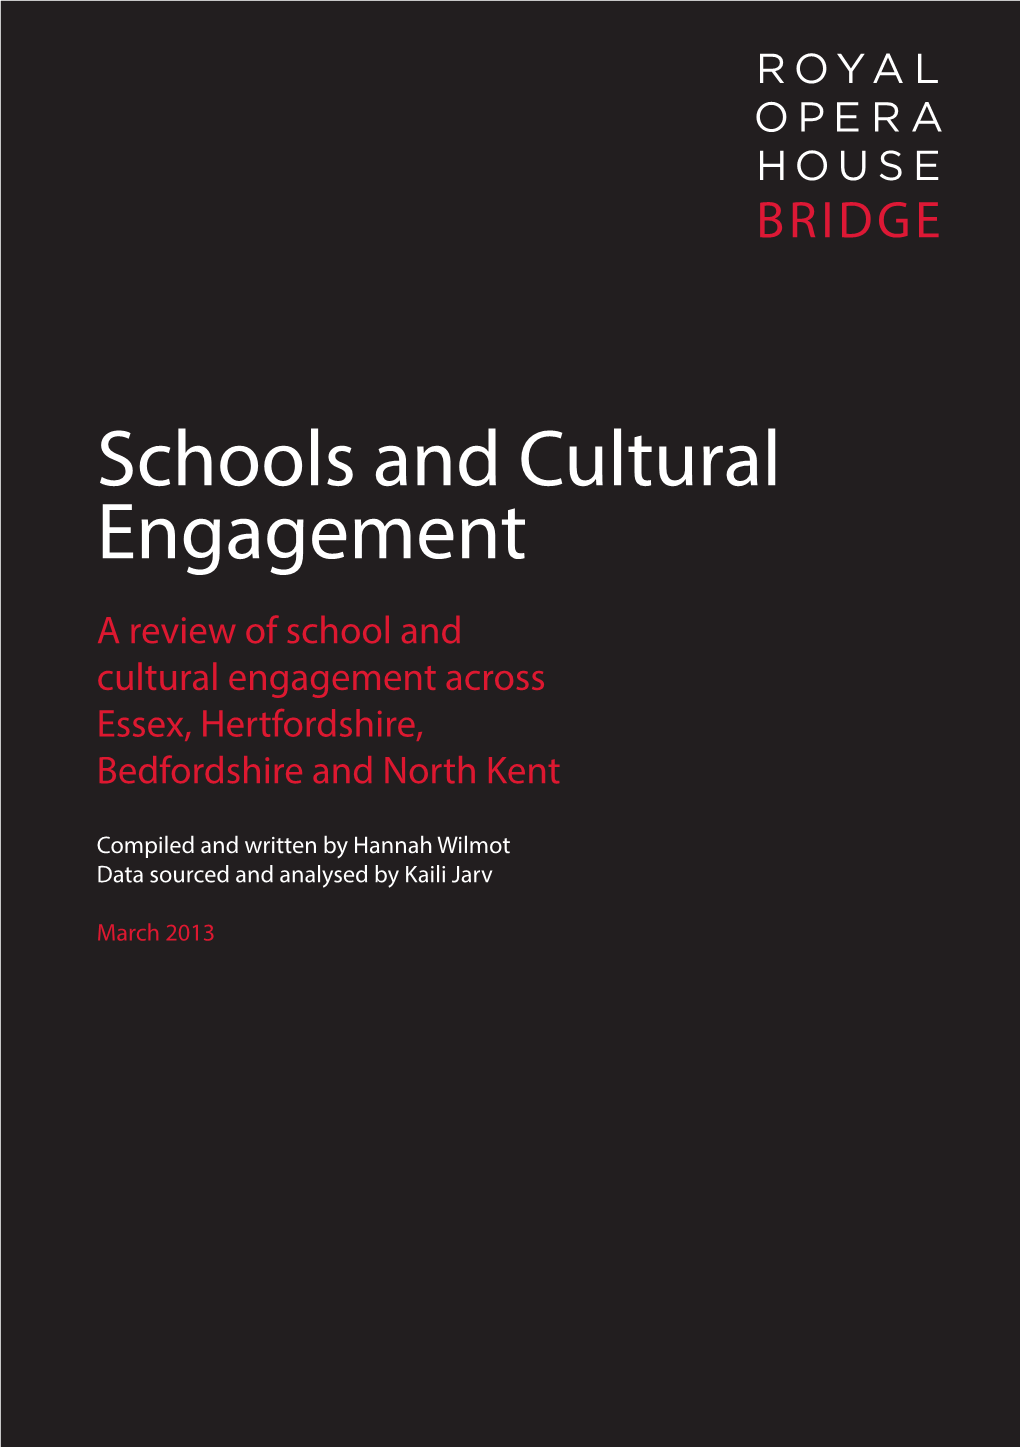 Schools and Cultural Engagement a Review of School and Cultural Engagement Across Essex, Hertfordshire, Bedfordshire and North Kent